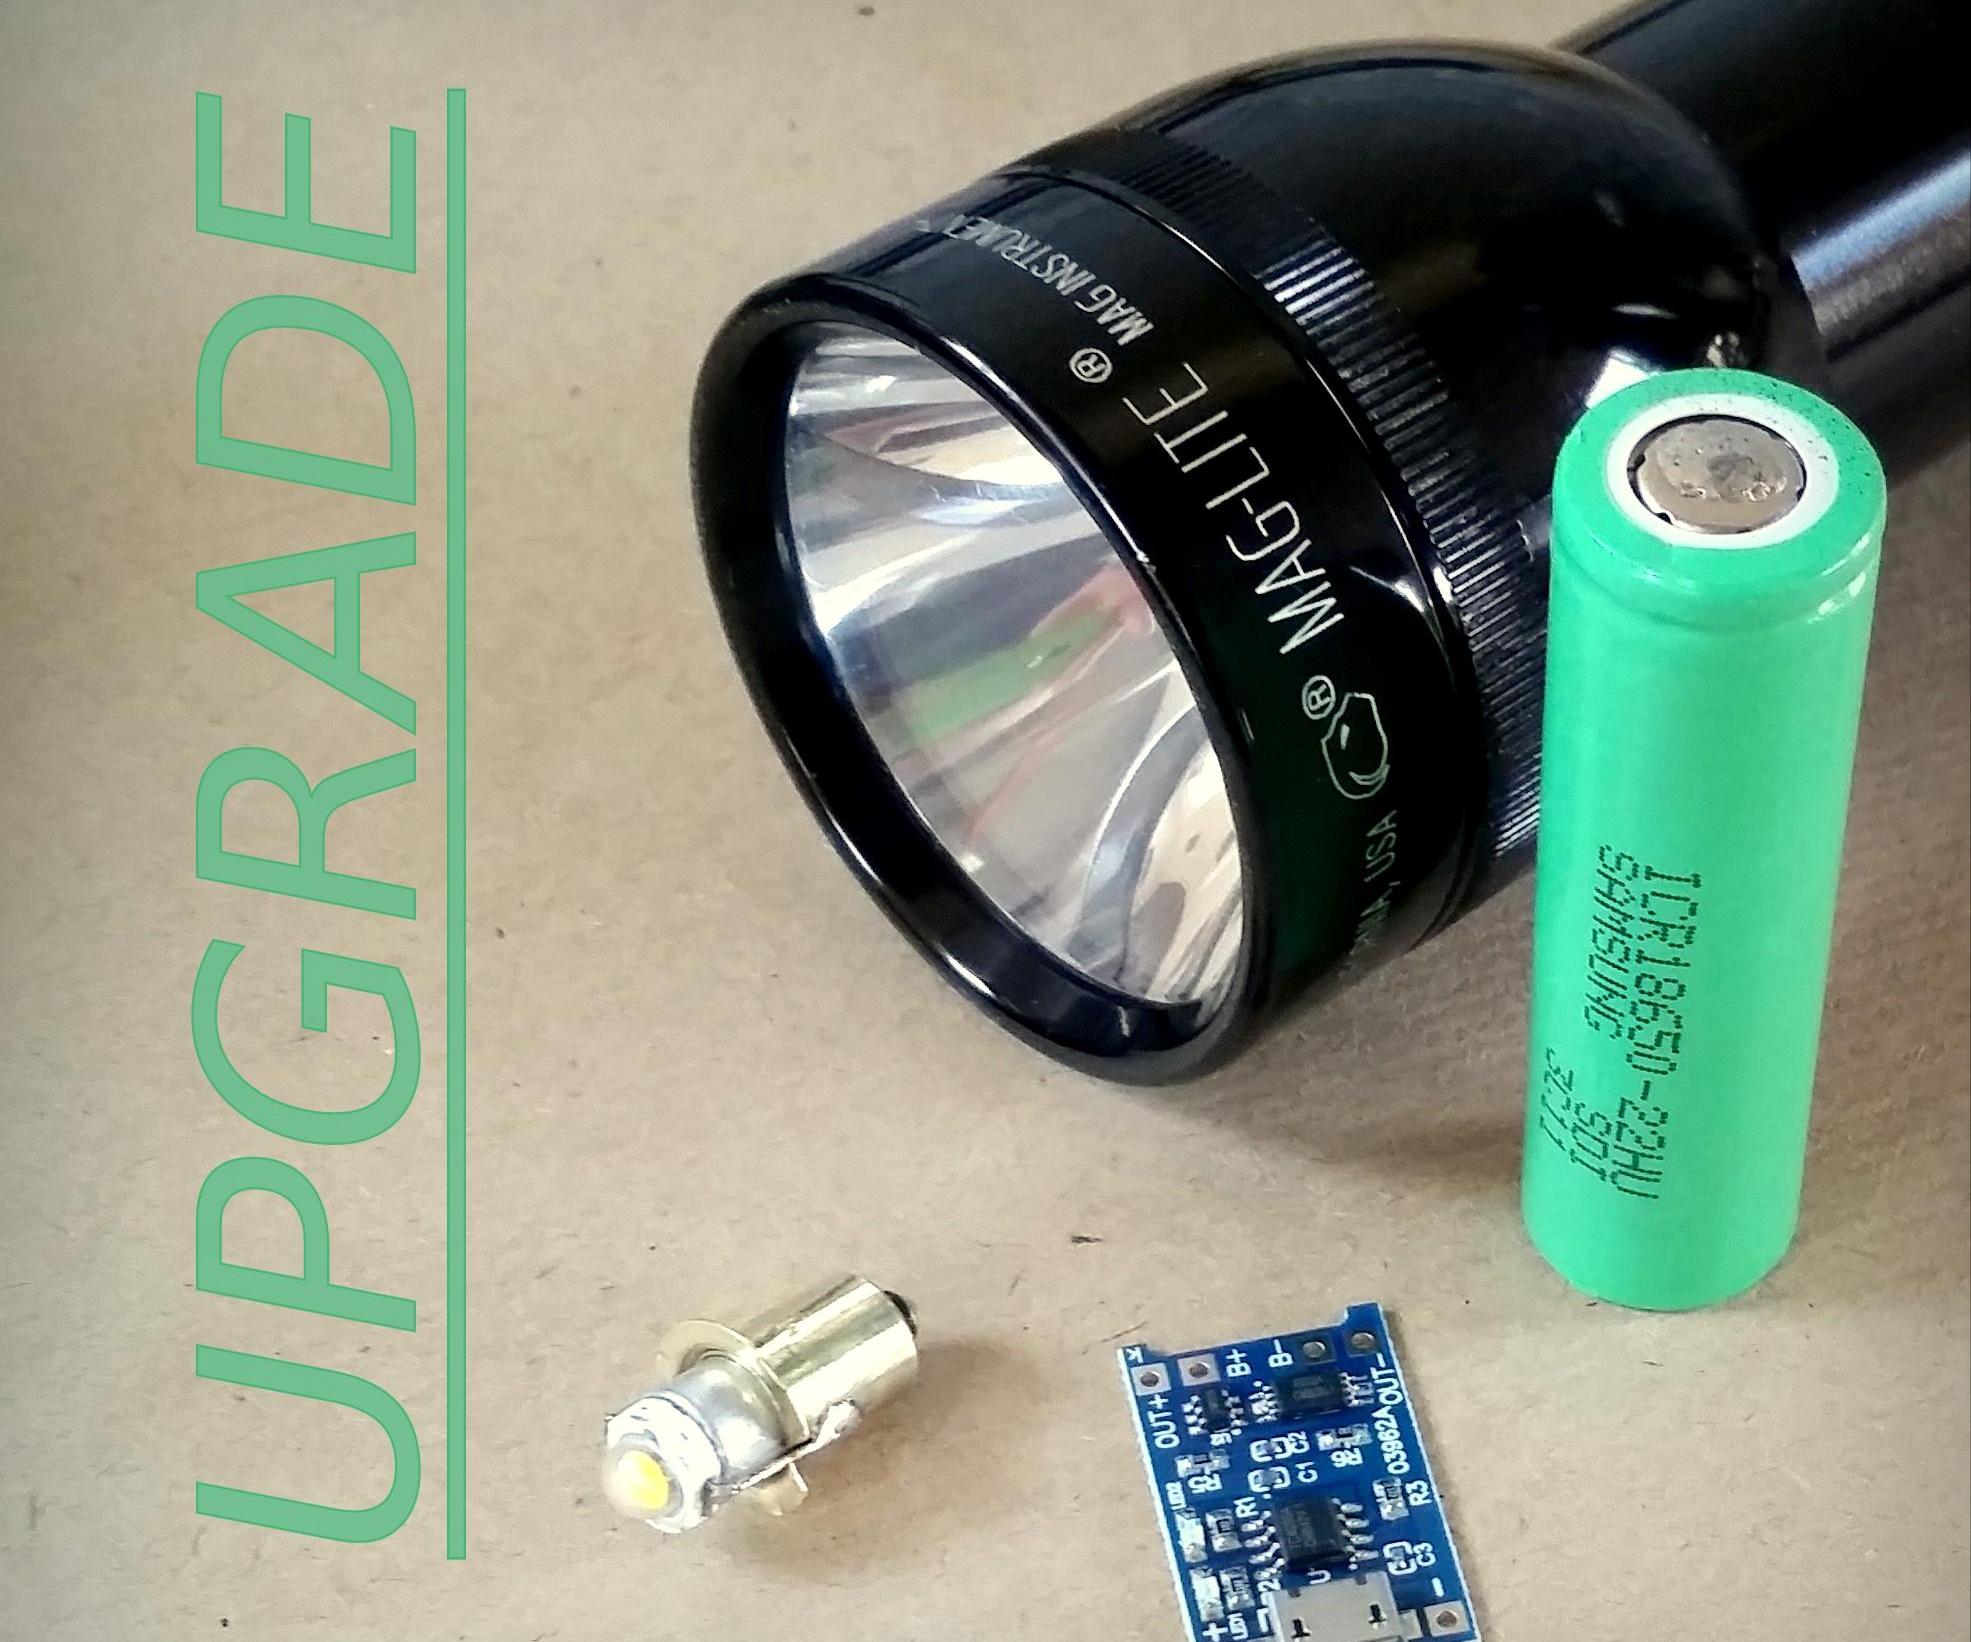 DIY Maglite USB Rechargeable 18650 and LED Upgrade